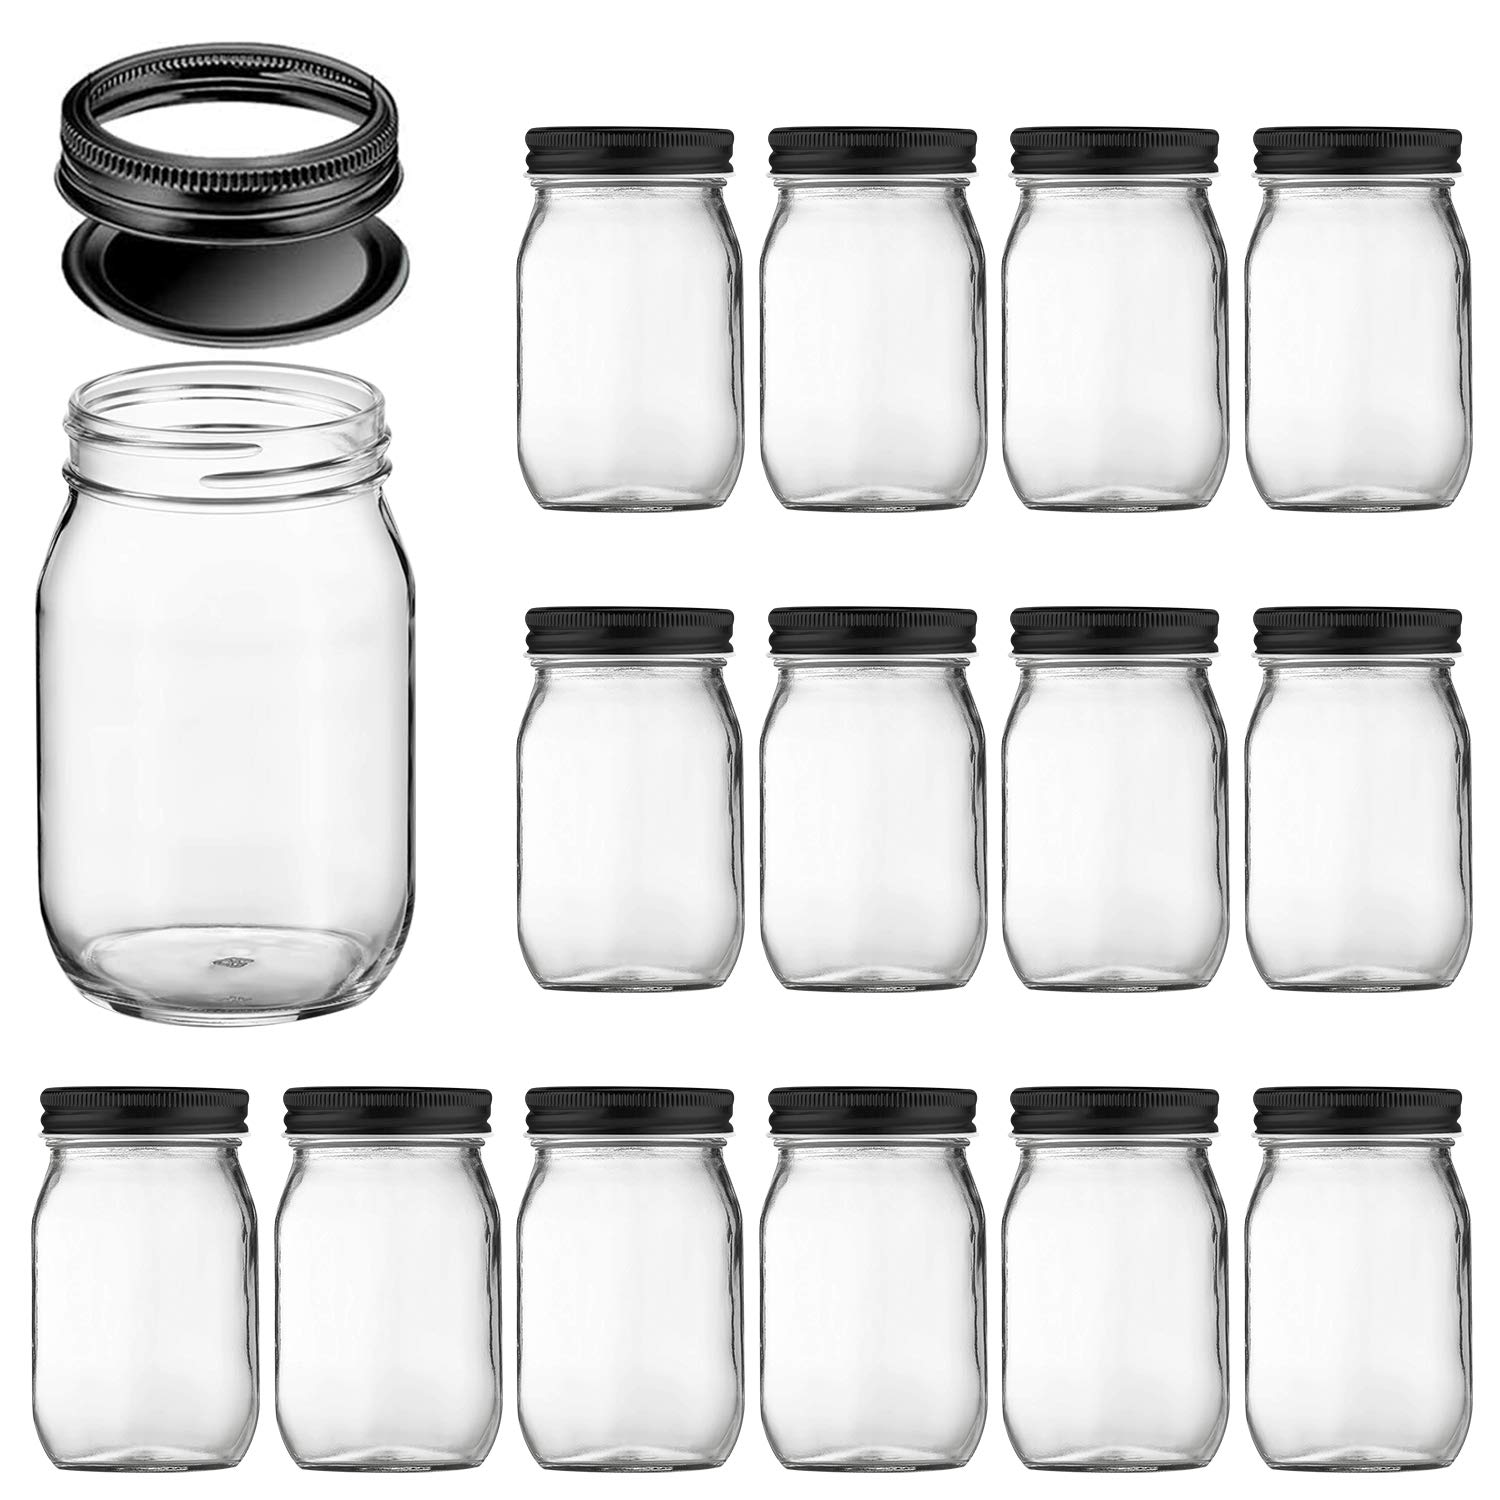 16oz Glass Jars With Airtight Lids And Bands,QAPPDA Canning Jars 16 oz With Lids,Wide Mouth Mason Jars Pickles Jars For Kitchen Canisters,Glass Sto...